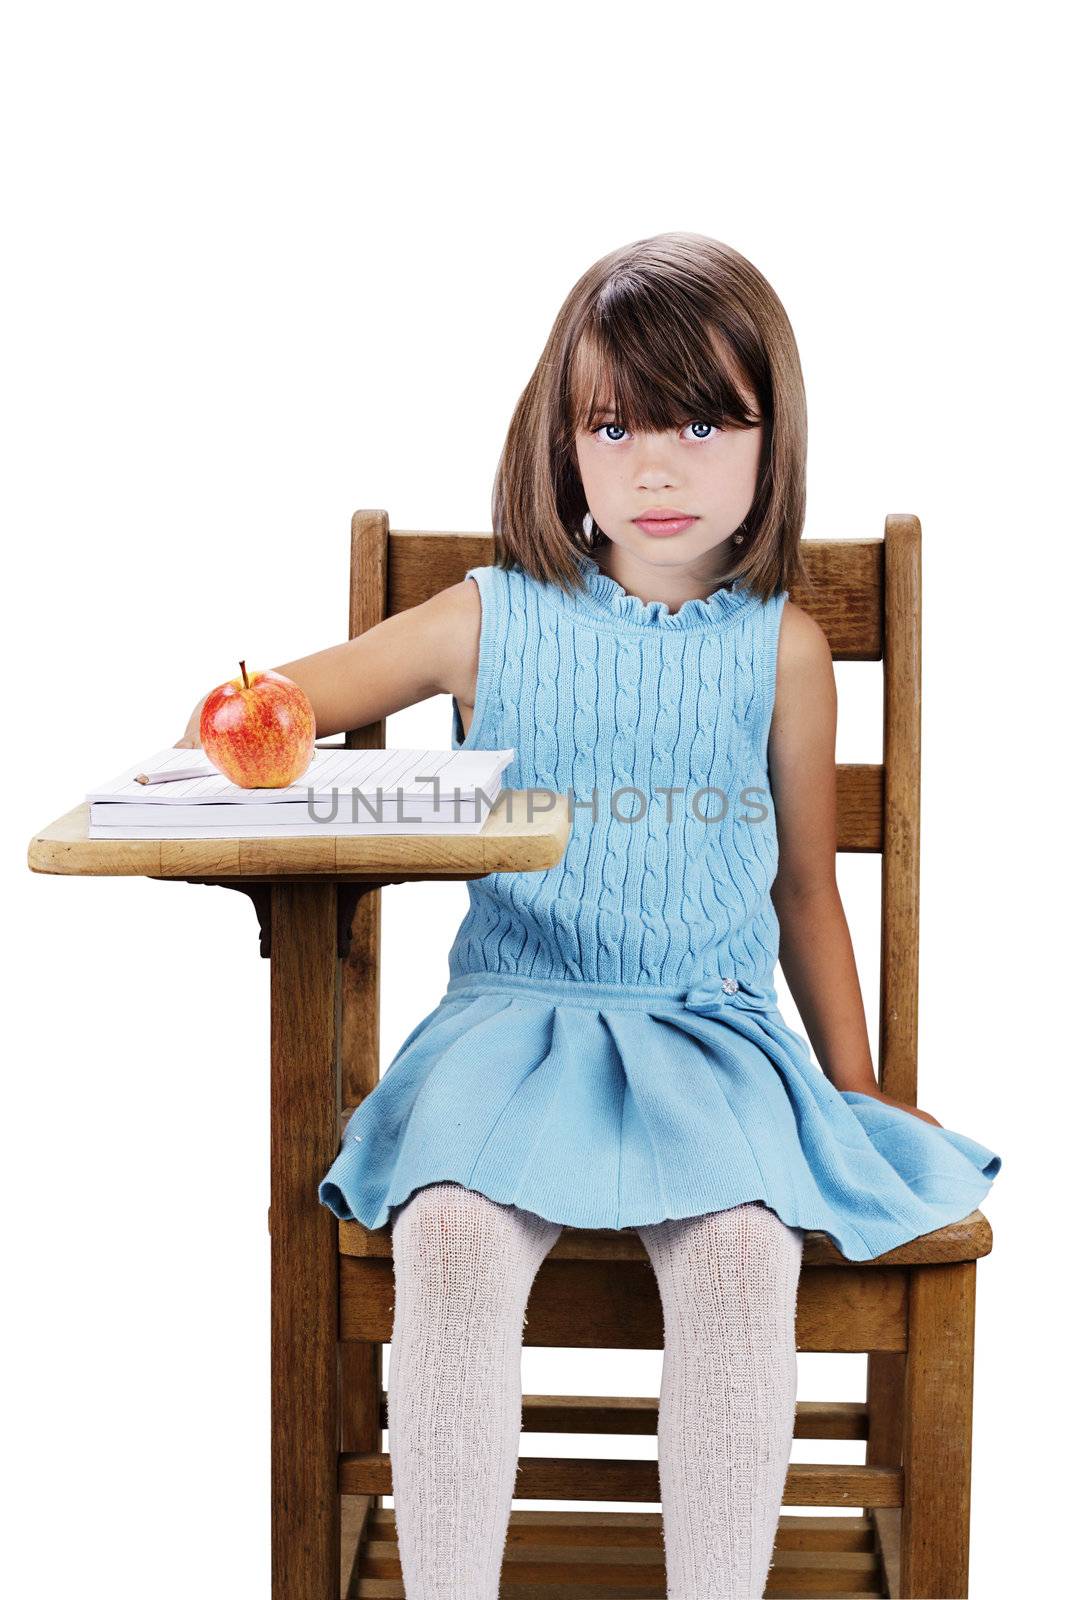 Little girl sitting at a school desk with apple and books. Isolated on a white background with clipping path included.